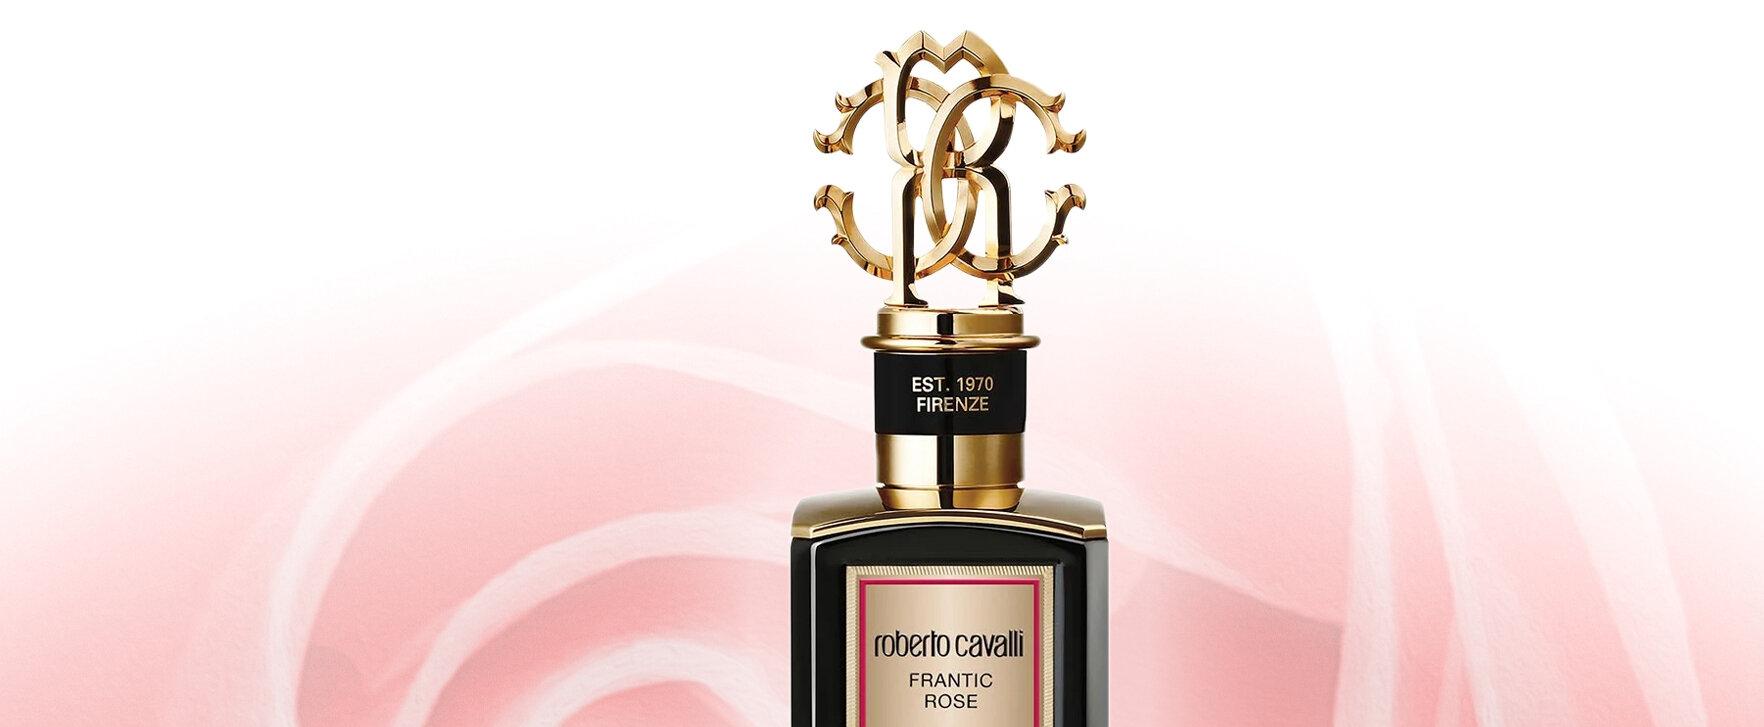 “Frantic Rose” - The Latest Addition to Roberto Cavalli’s Gold Collection